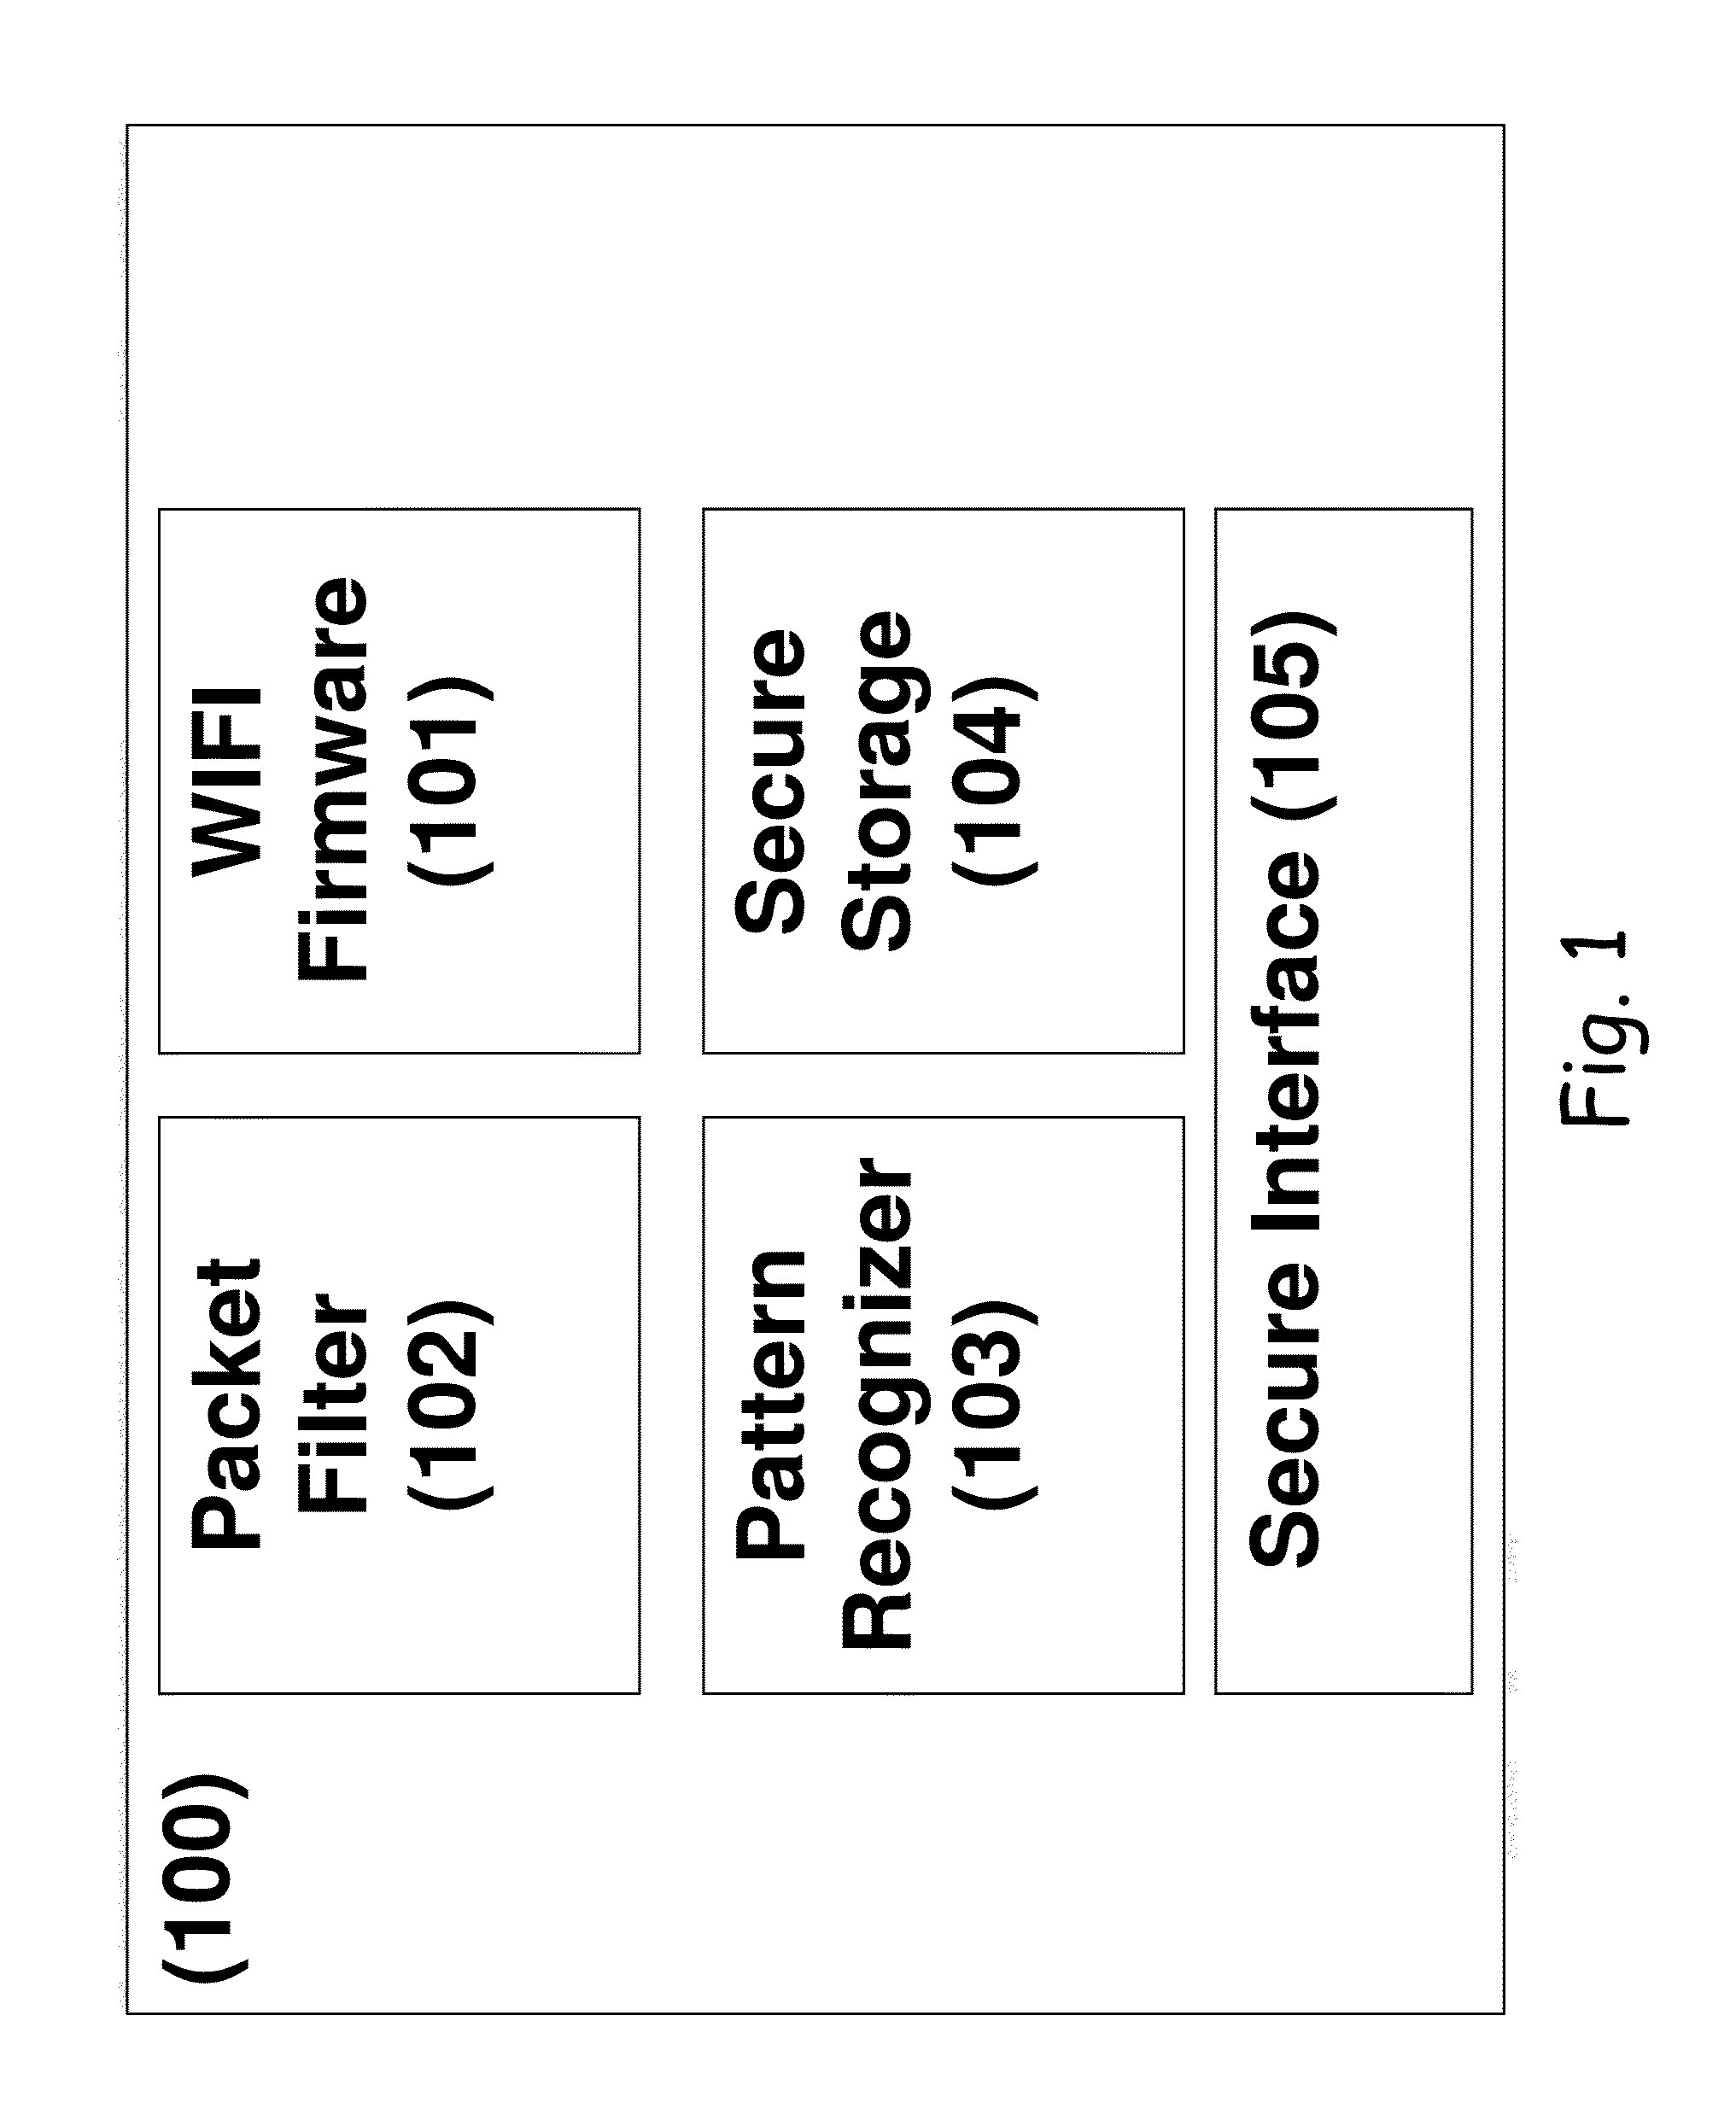 Preventive intrusion device and method for mobile devices